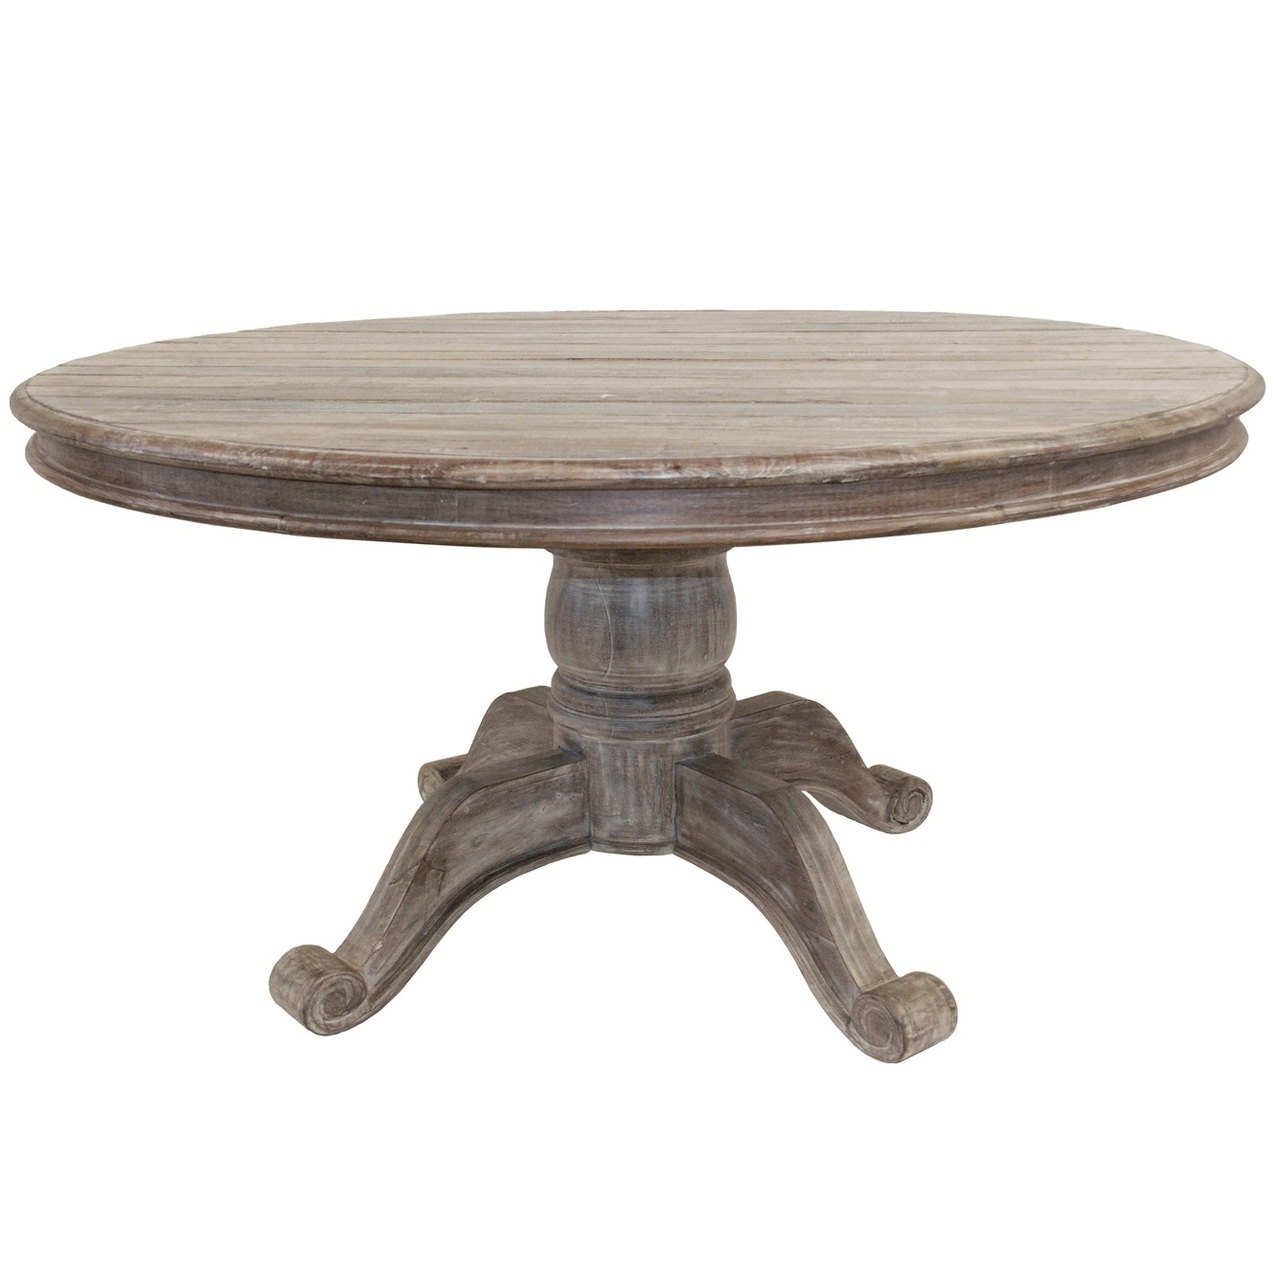 hampton rustic round pedestal dining table zin home accent throne for drums modern chairs theater room furniture new coffee office depot great distressed wood patio umbrella stand